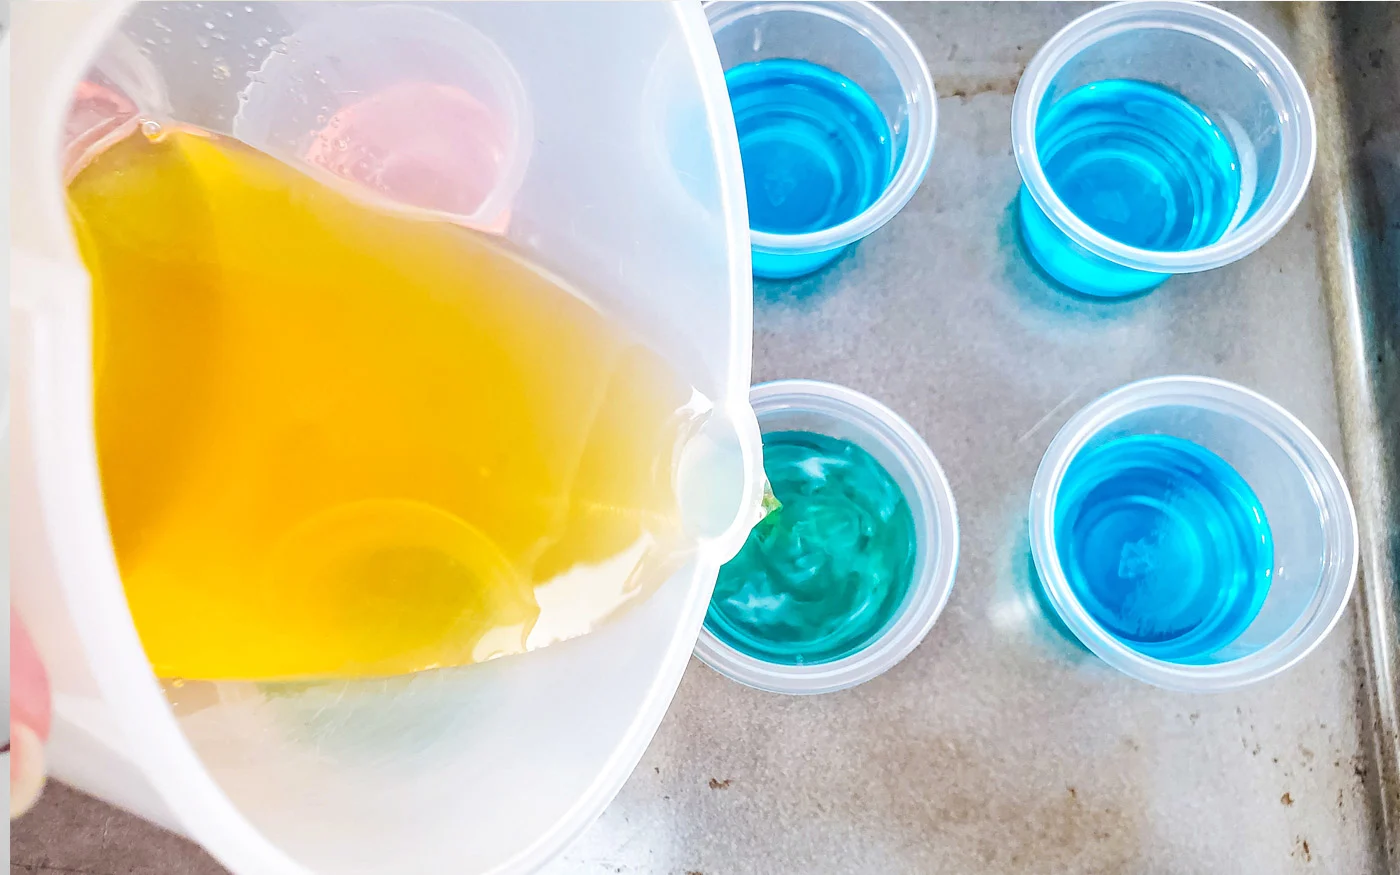 Pouring the lemon starburst jello mixture over the chilled blue raspberry jello in a plastic shot glass sitting on a cookie sheet.